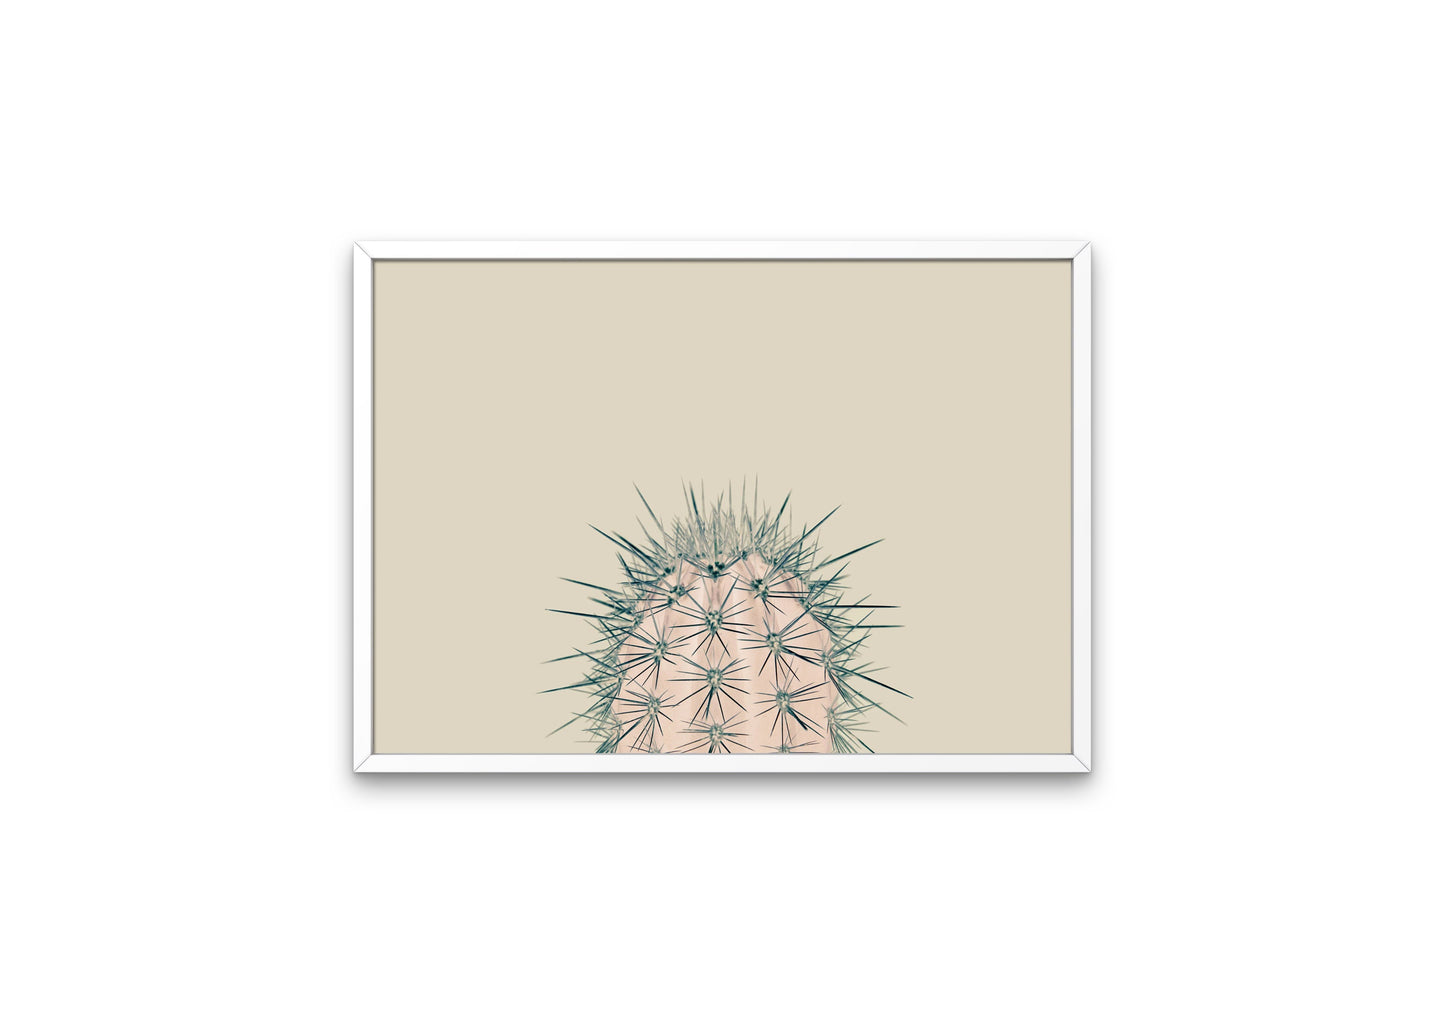 Beige Cactus Wall Art DIGITAL PRINT, Cactus poster, Landscape Prints Wall Art, modern country style print, houseplant poster, large cactus